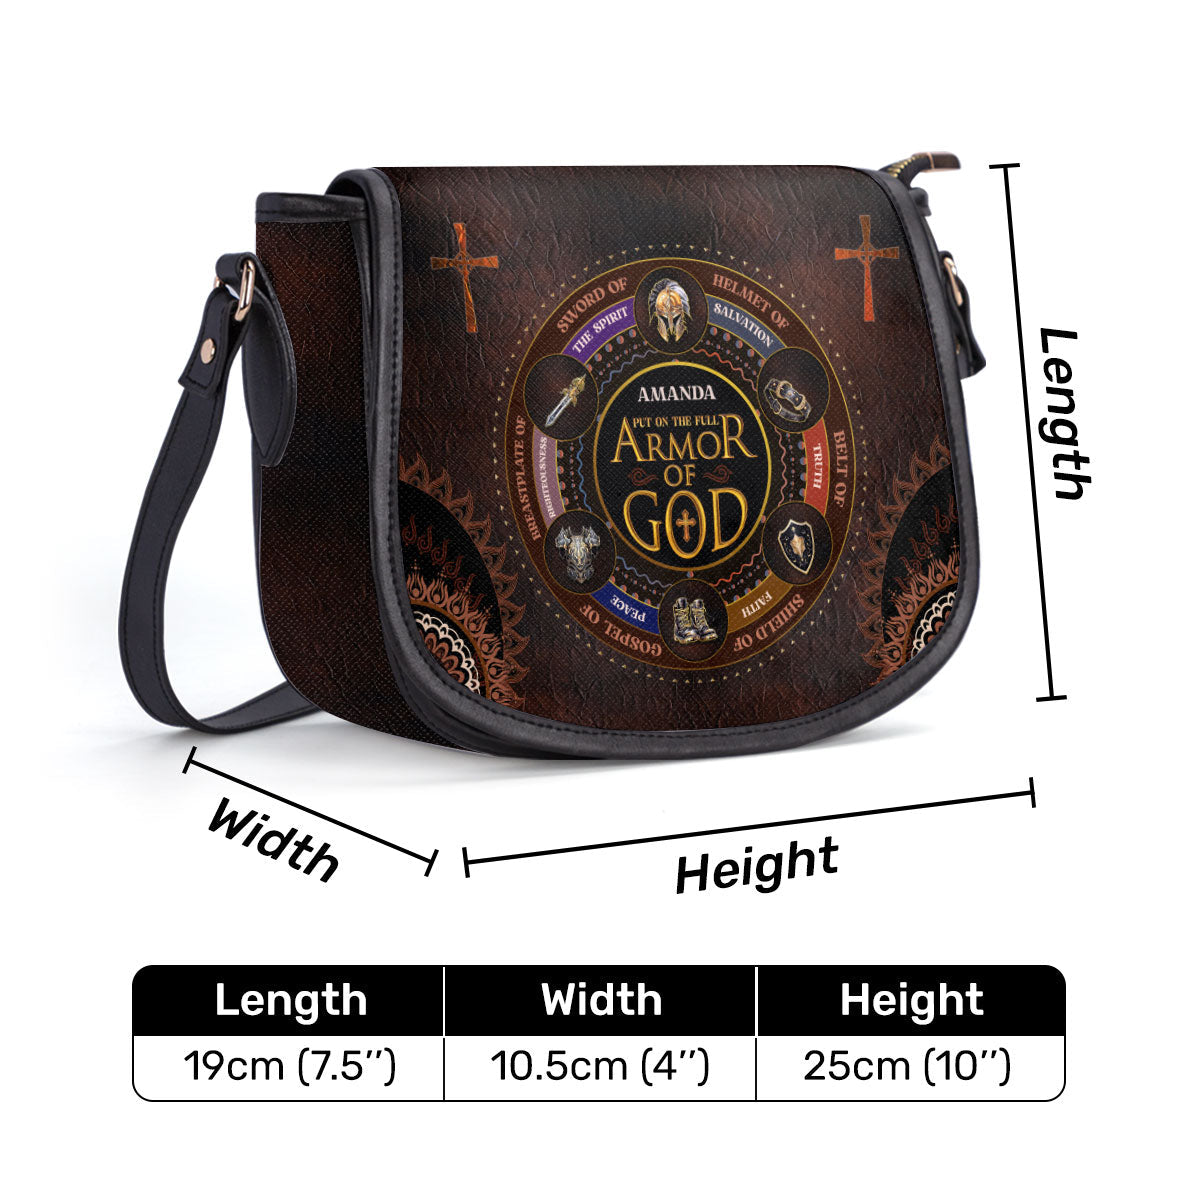 Put On the Full Armor Of God Personalized Leather Saddle Bag - Christian Women's Handbag Gifts